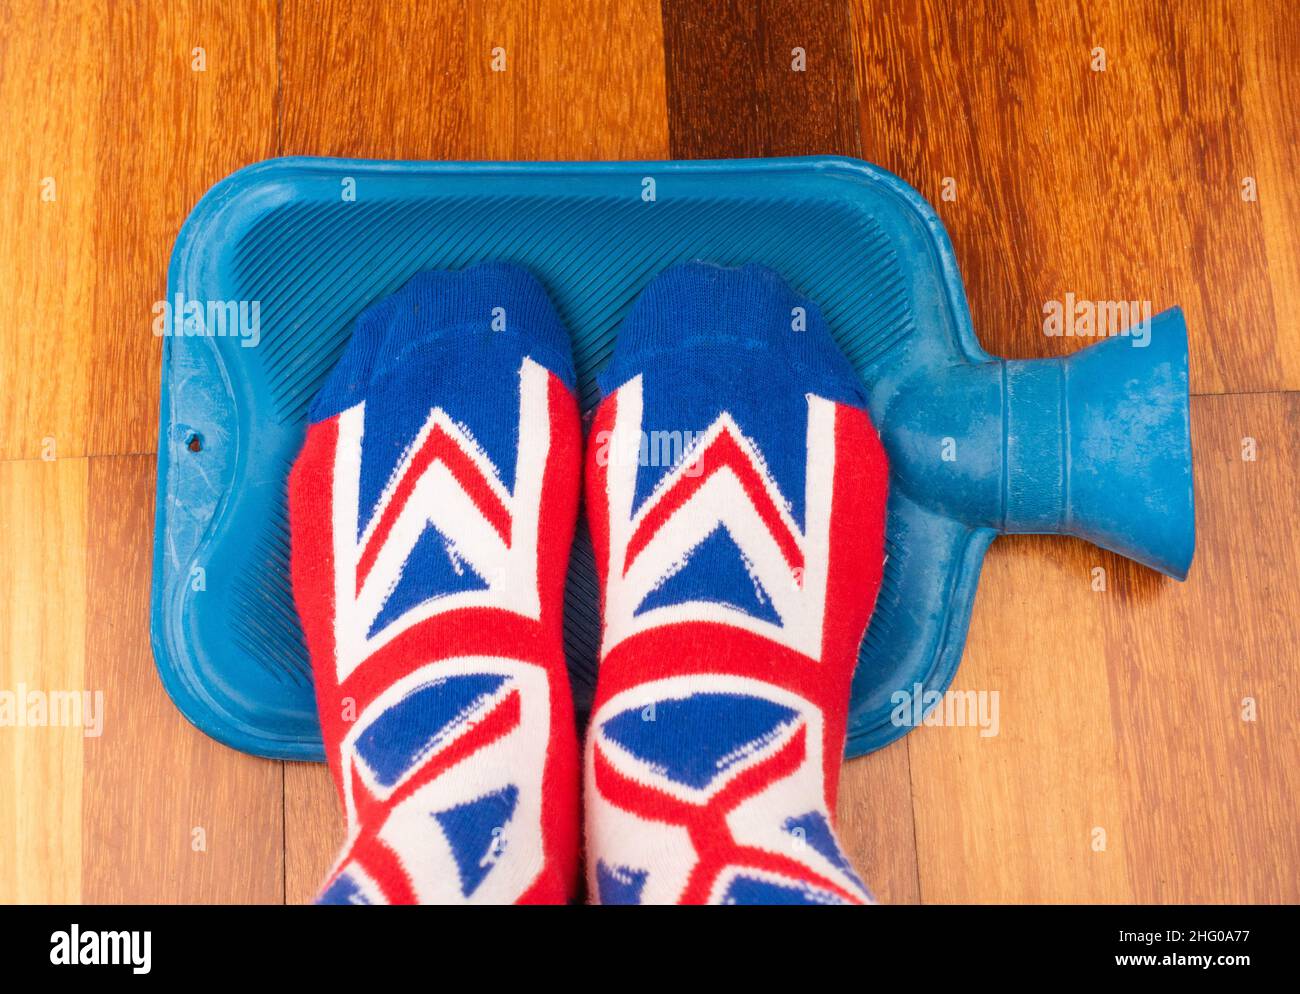 Person wearing Union Jack socks keeping feet warm on hot water bottle. rising energy, electricity, gas prices, cost of living... concept. Stock Photo